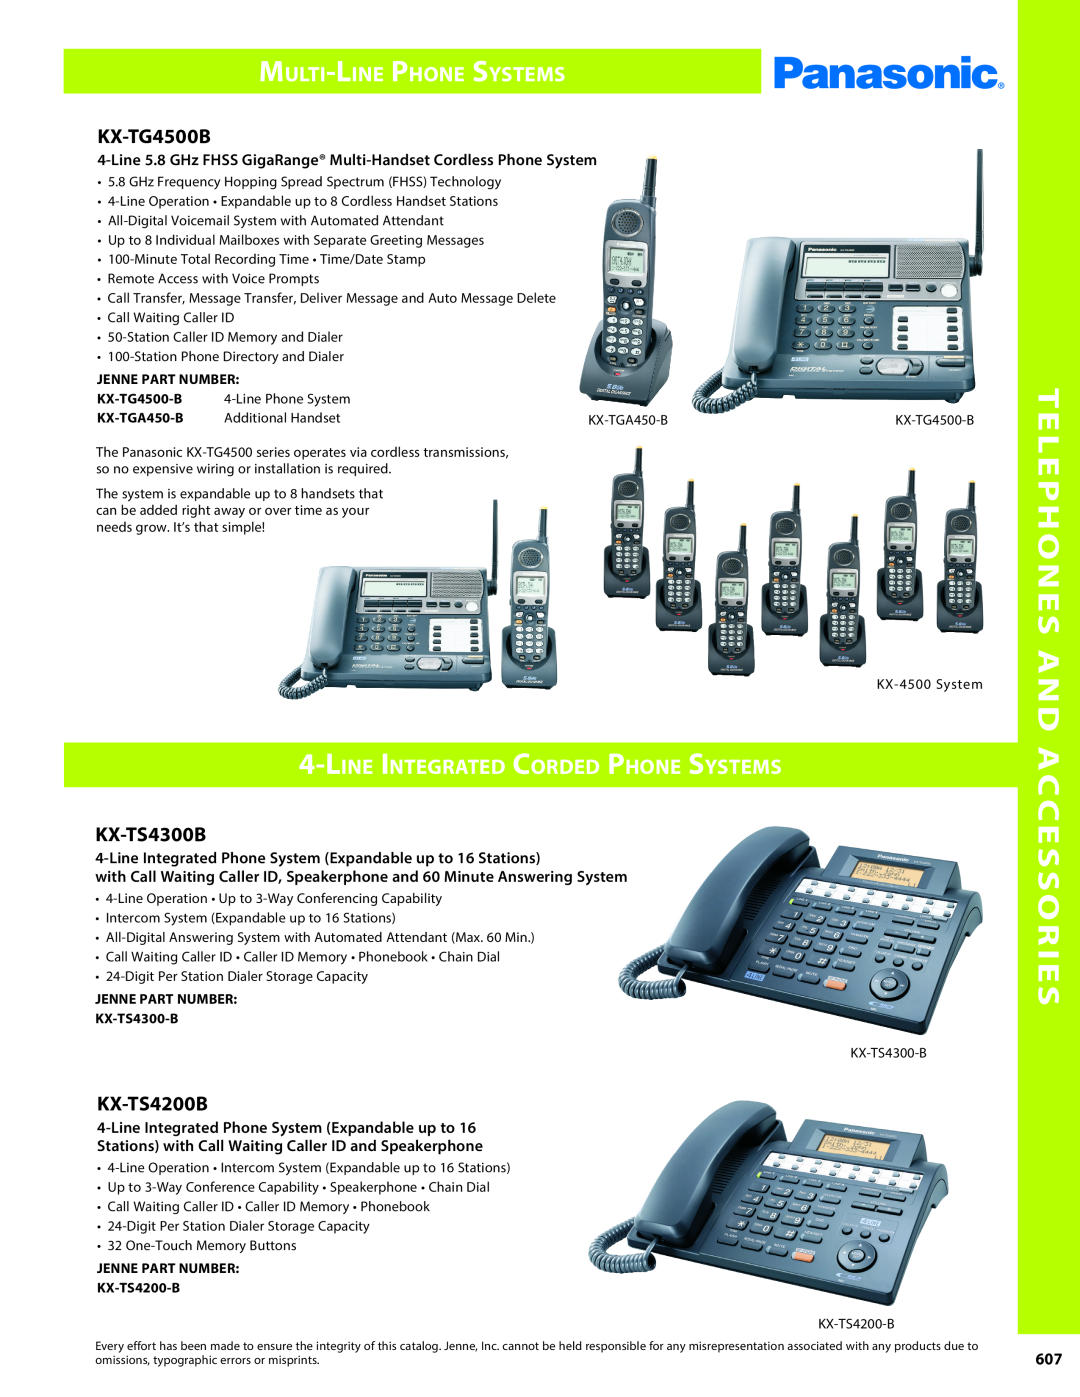 Panasonic PMPU2000 Multi-Line Phone Systems, Line Integrated Corded Phone Systems, Telephones And Accessories, KX-TG4500B 